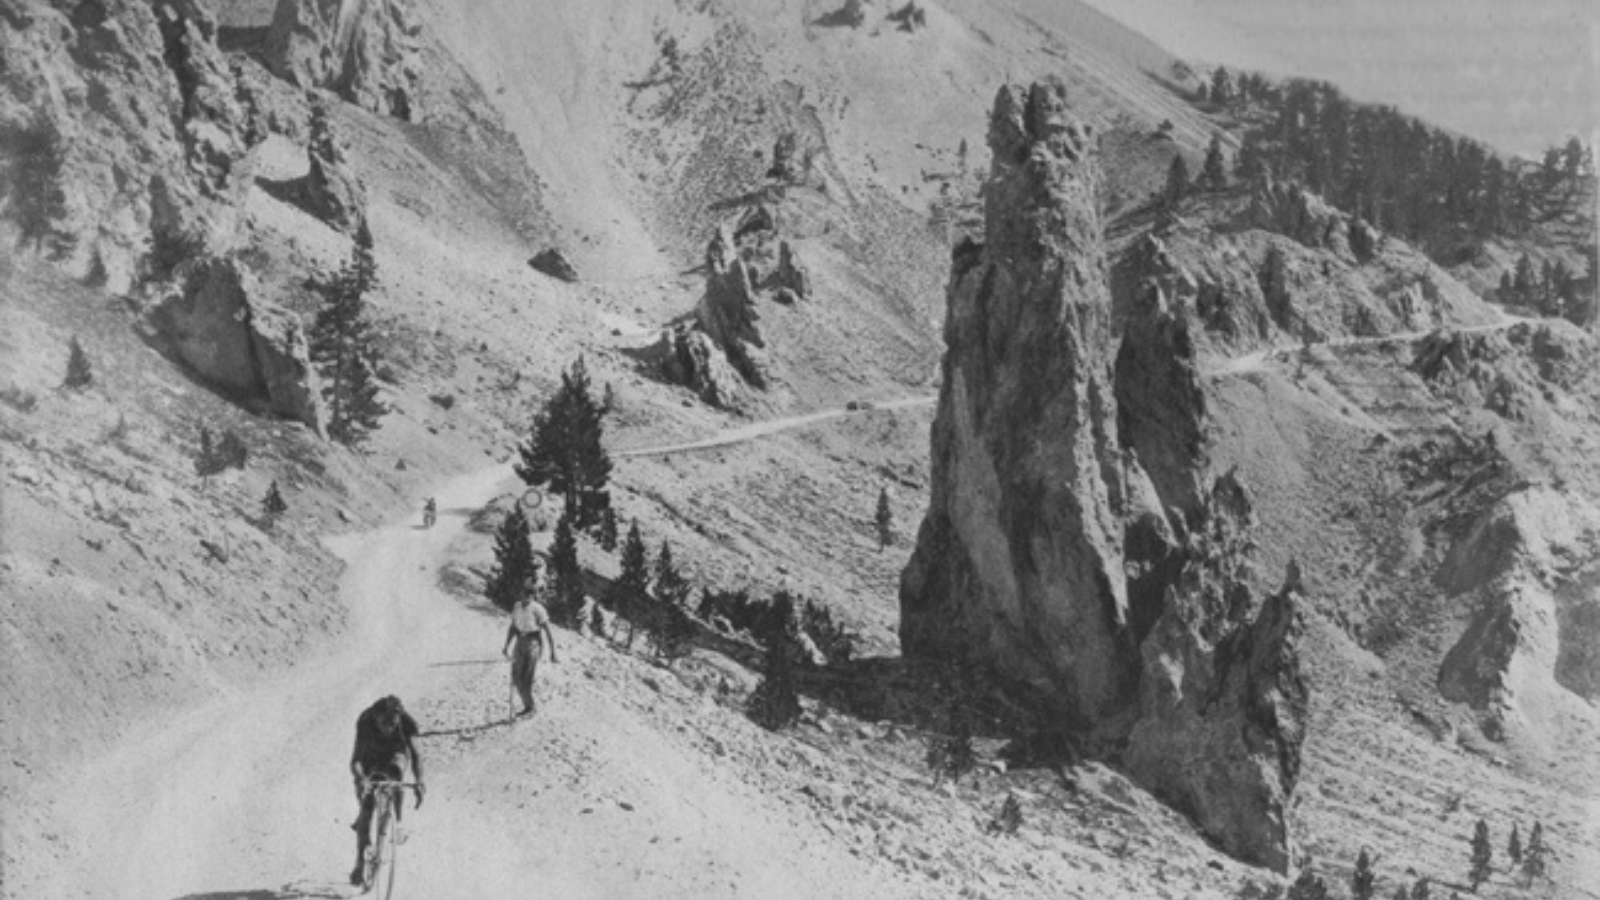 Sylvére Maes, winner if the Tour de France in 2939 on the descent of Col d' Izoard